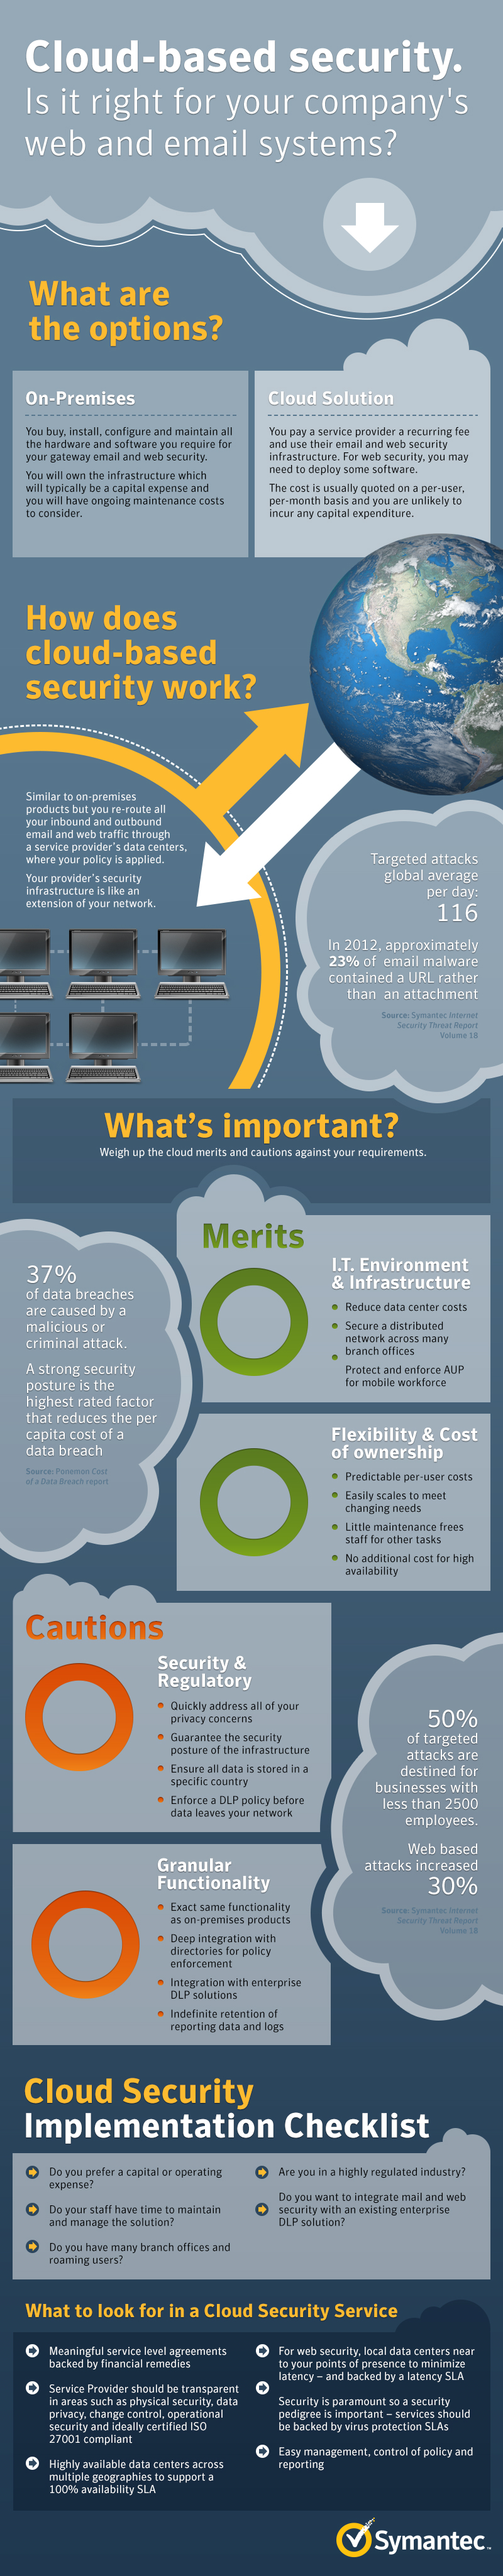 Infographic: Is Cloud-Based Security Right for Your Company?